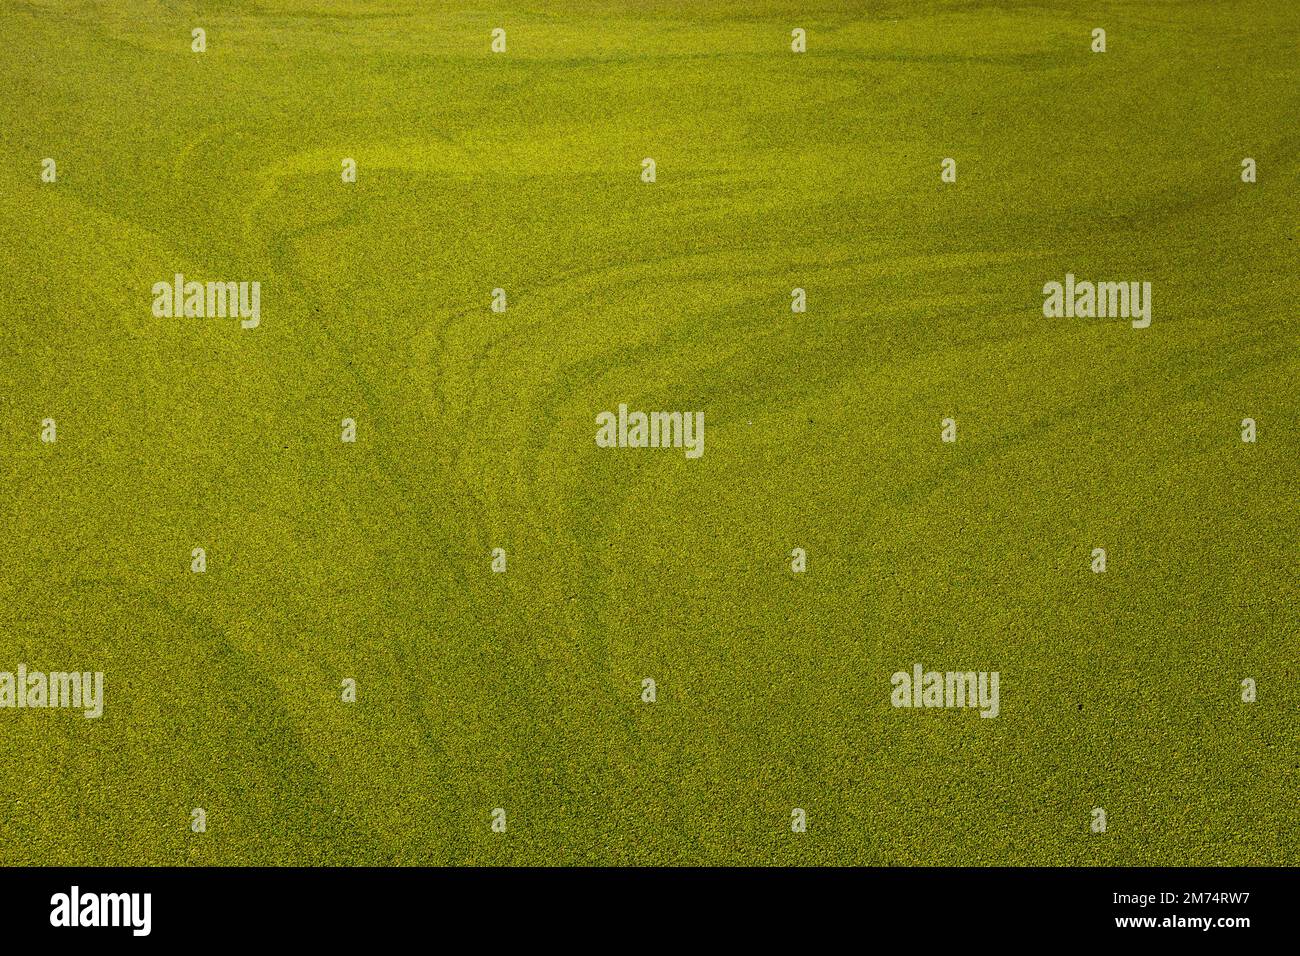 Photo of subtle patterns in duckweed on a pond Stock Photo